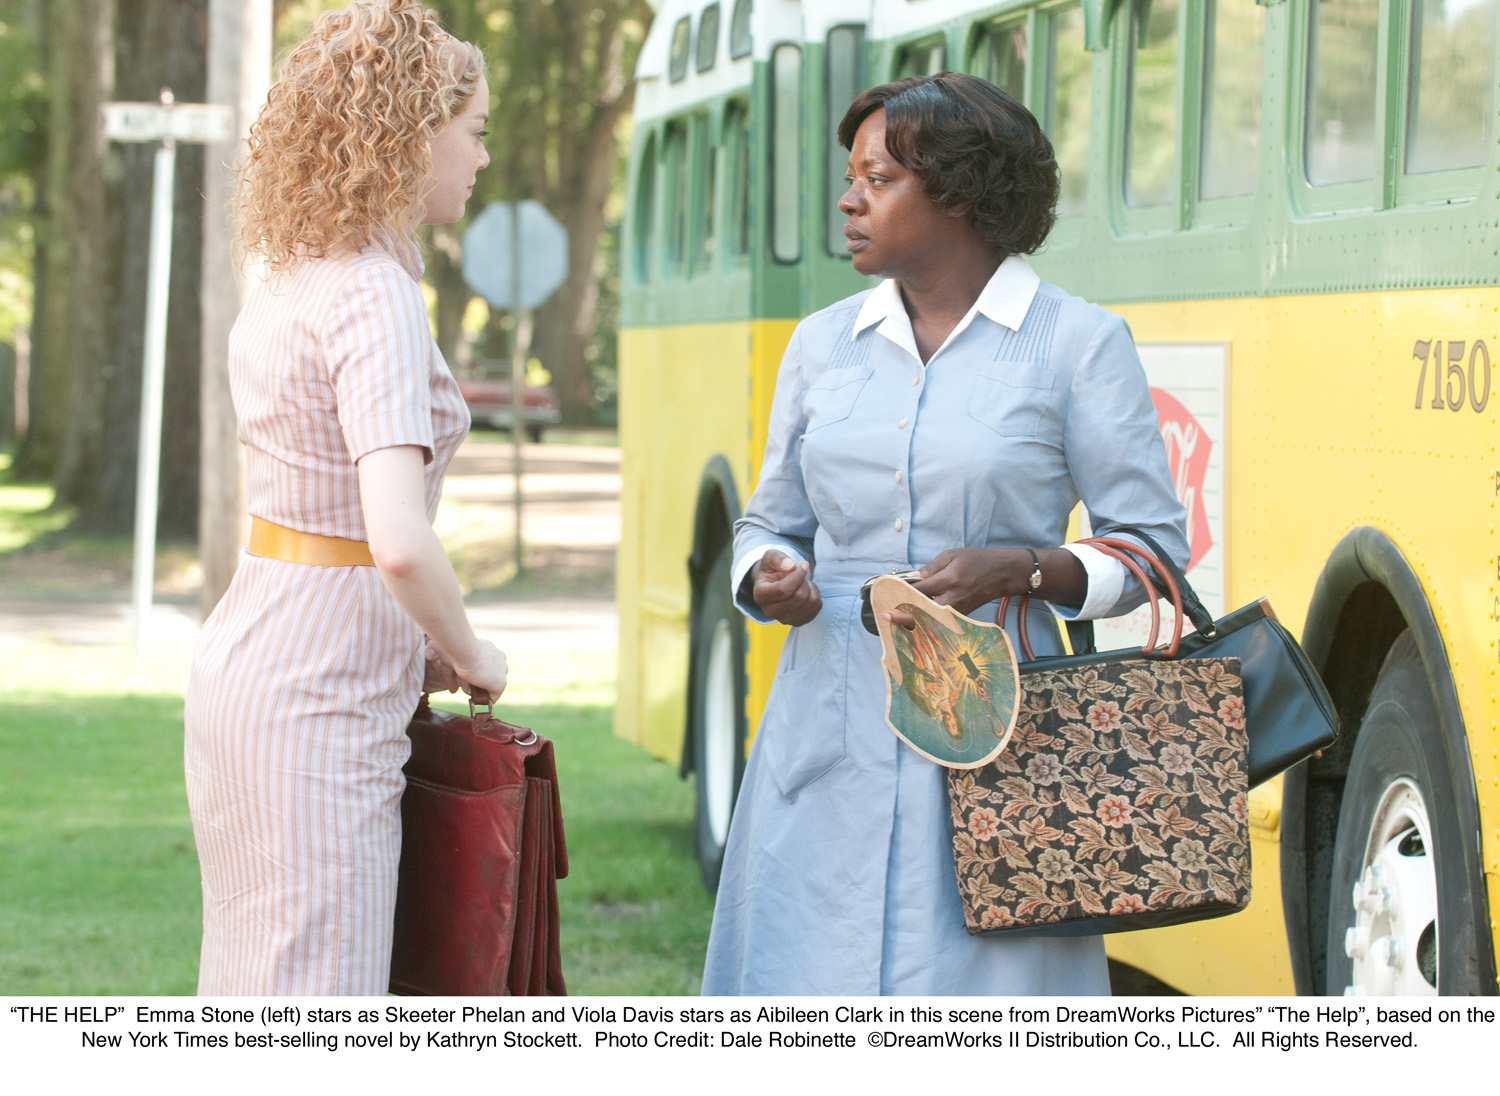 the help movie review essay